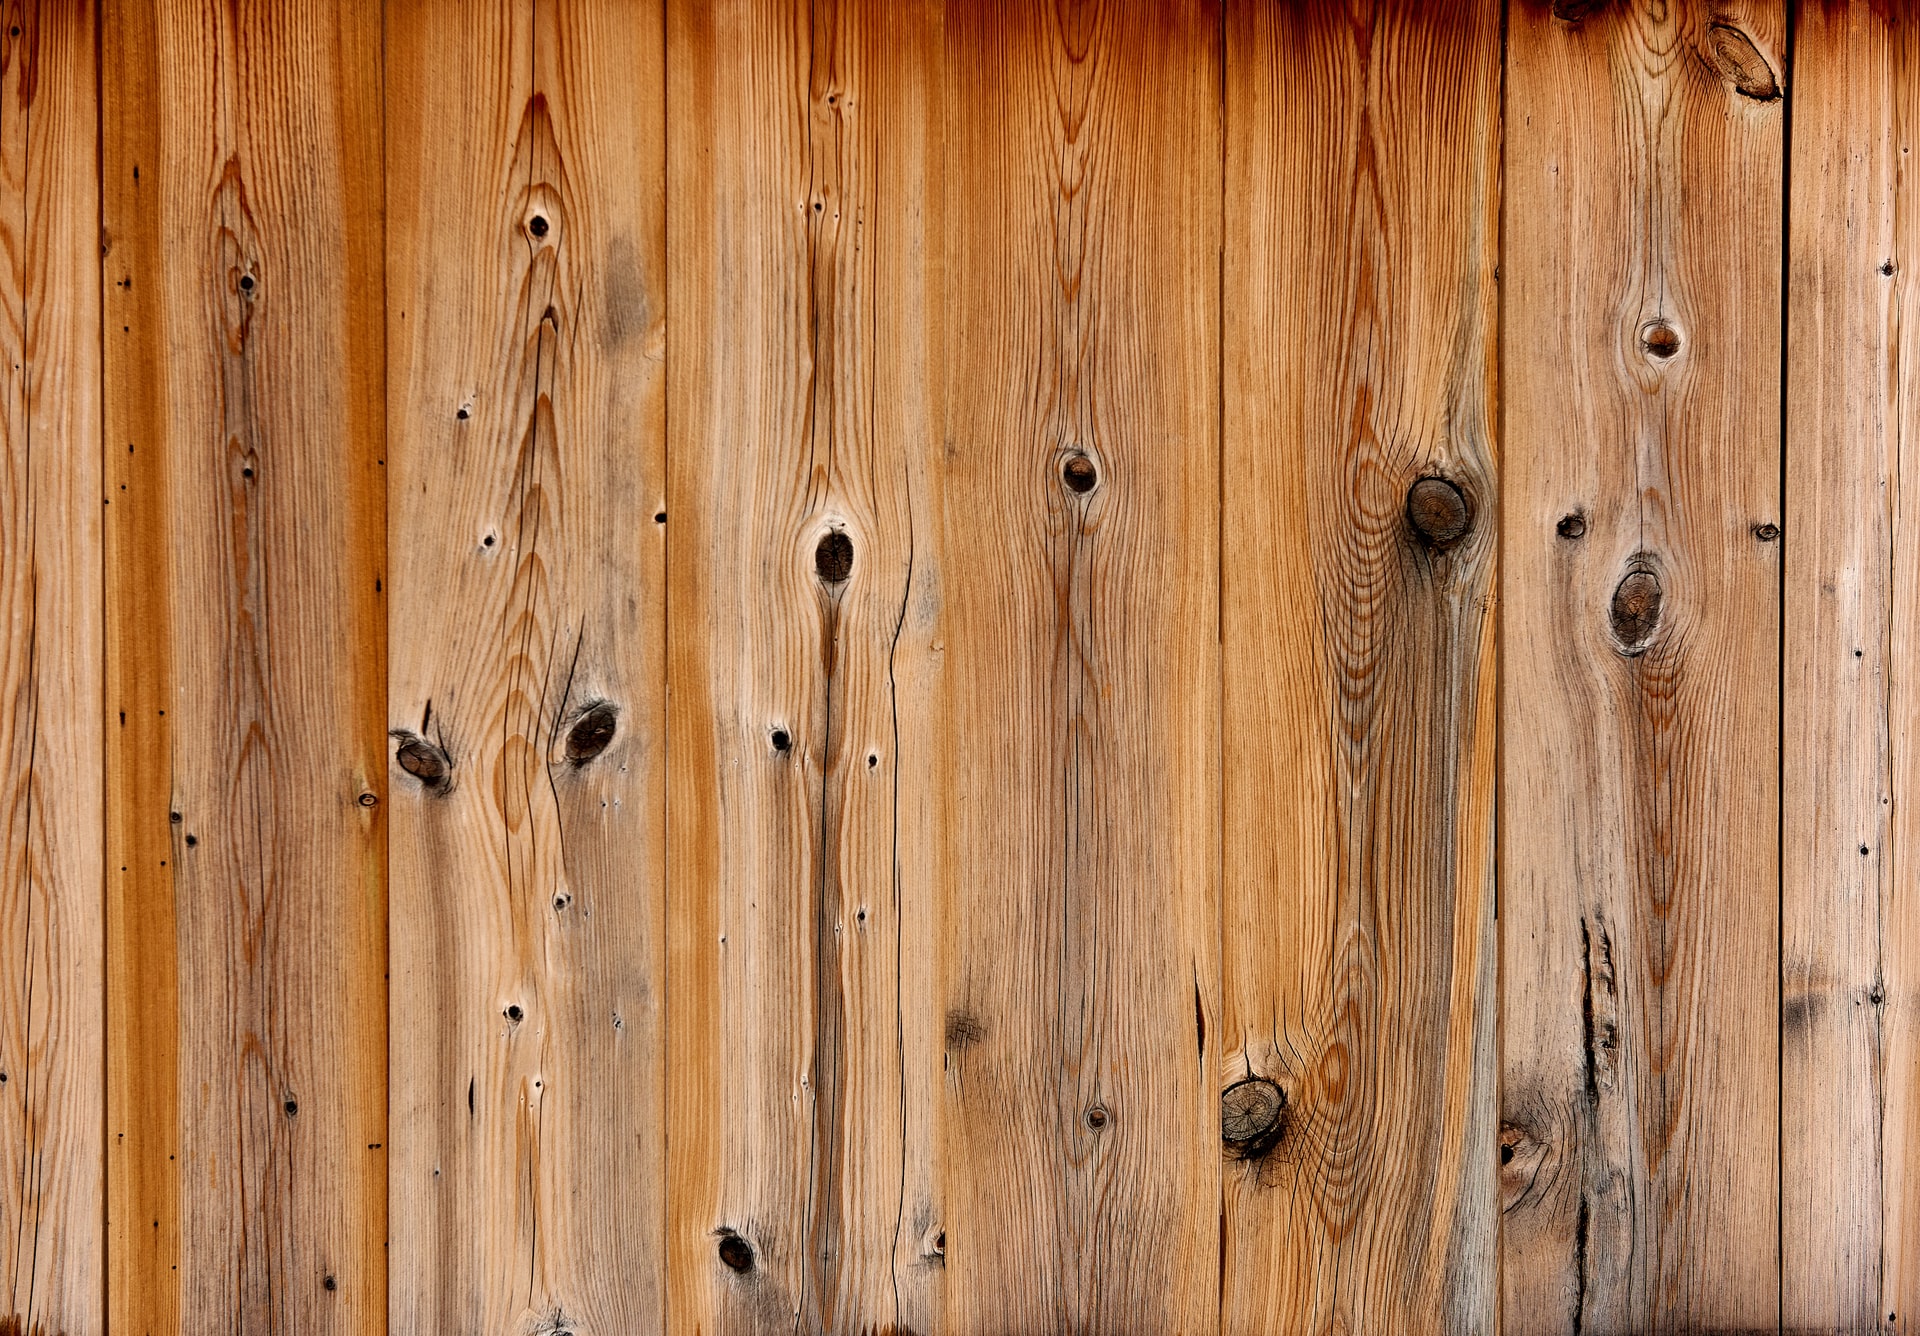 Pine wood pests – how to protect the wood?